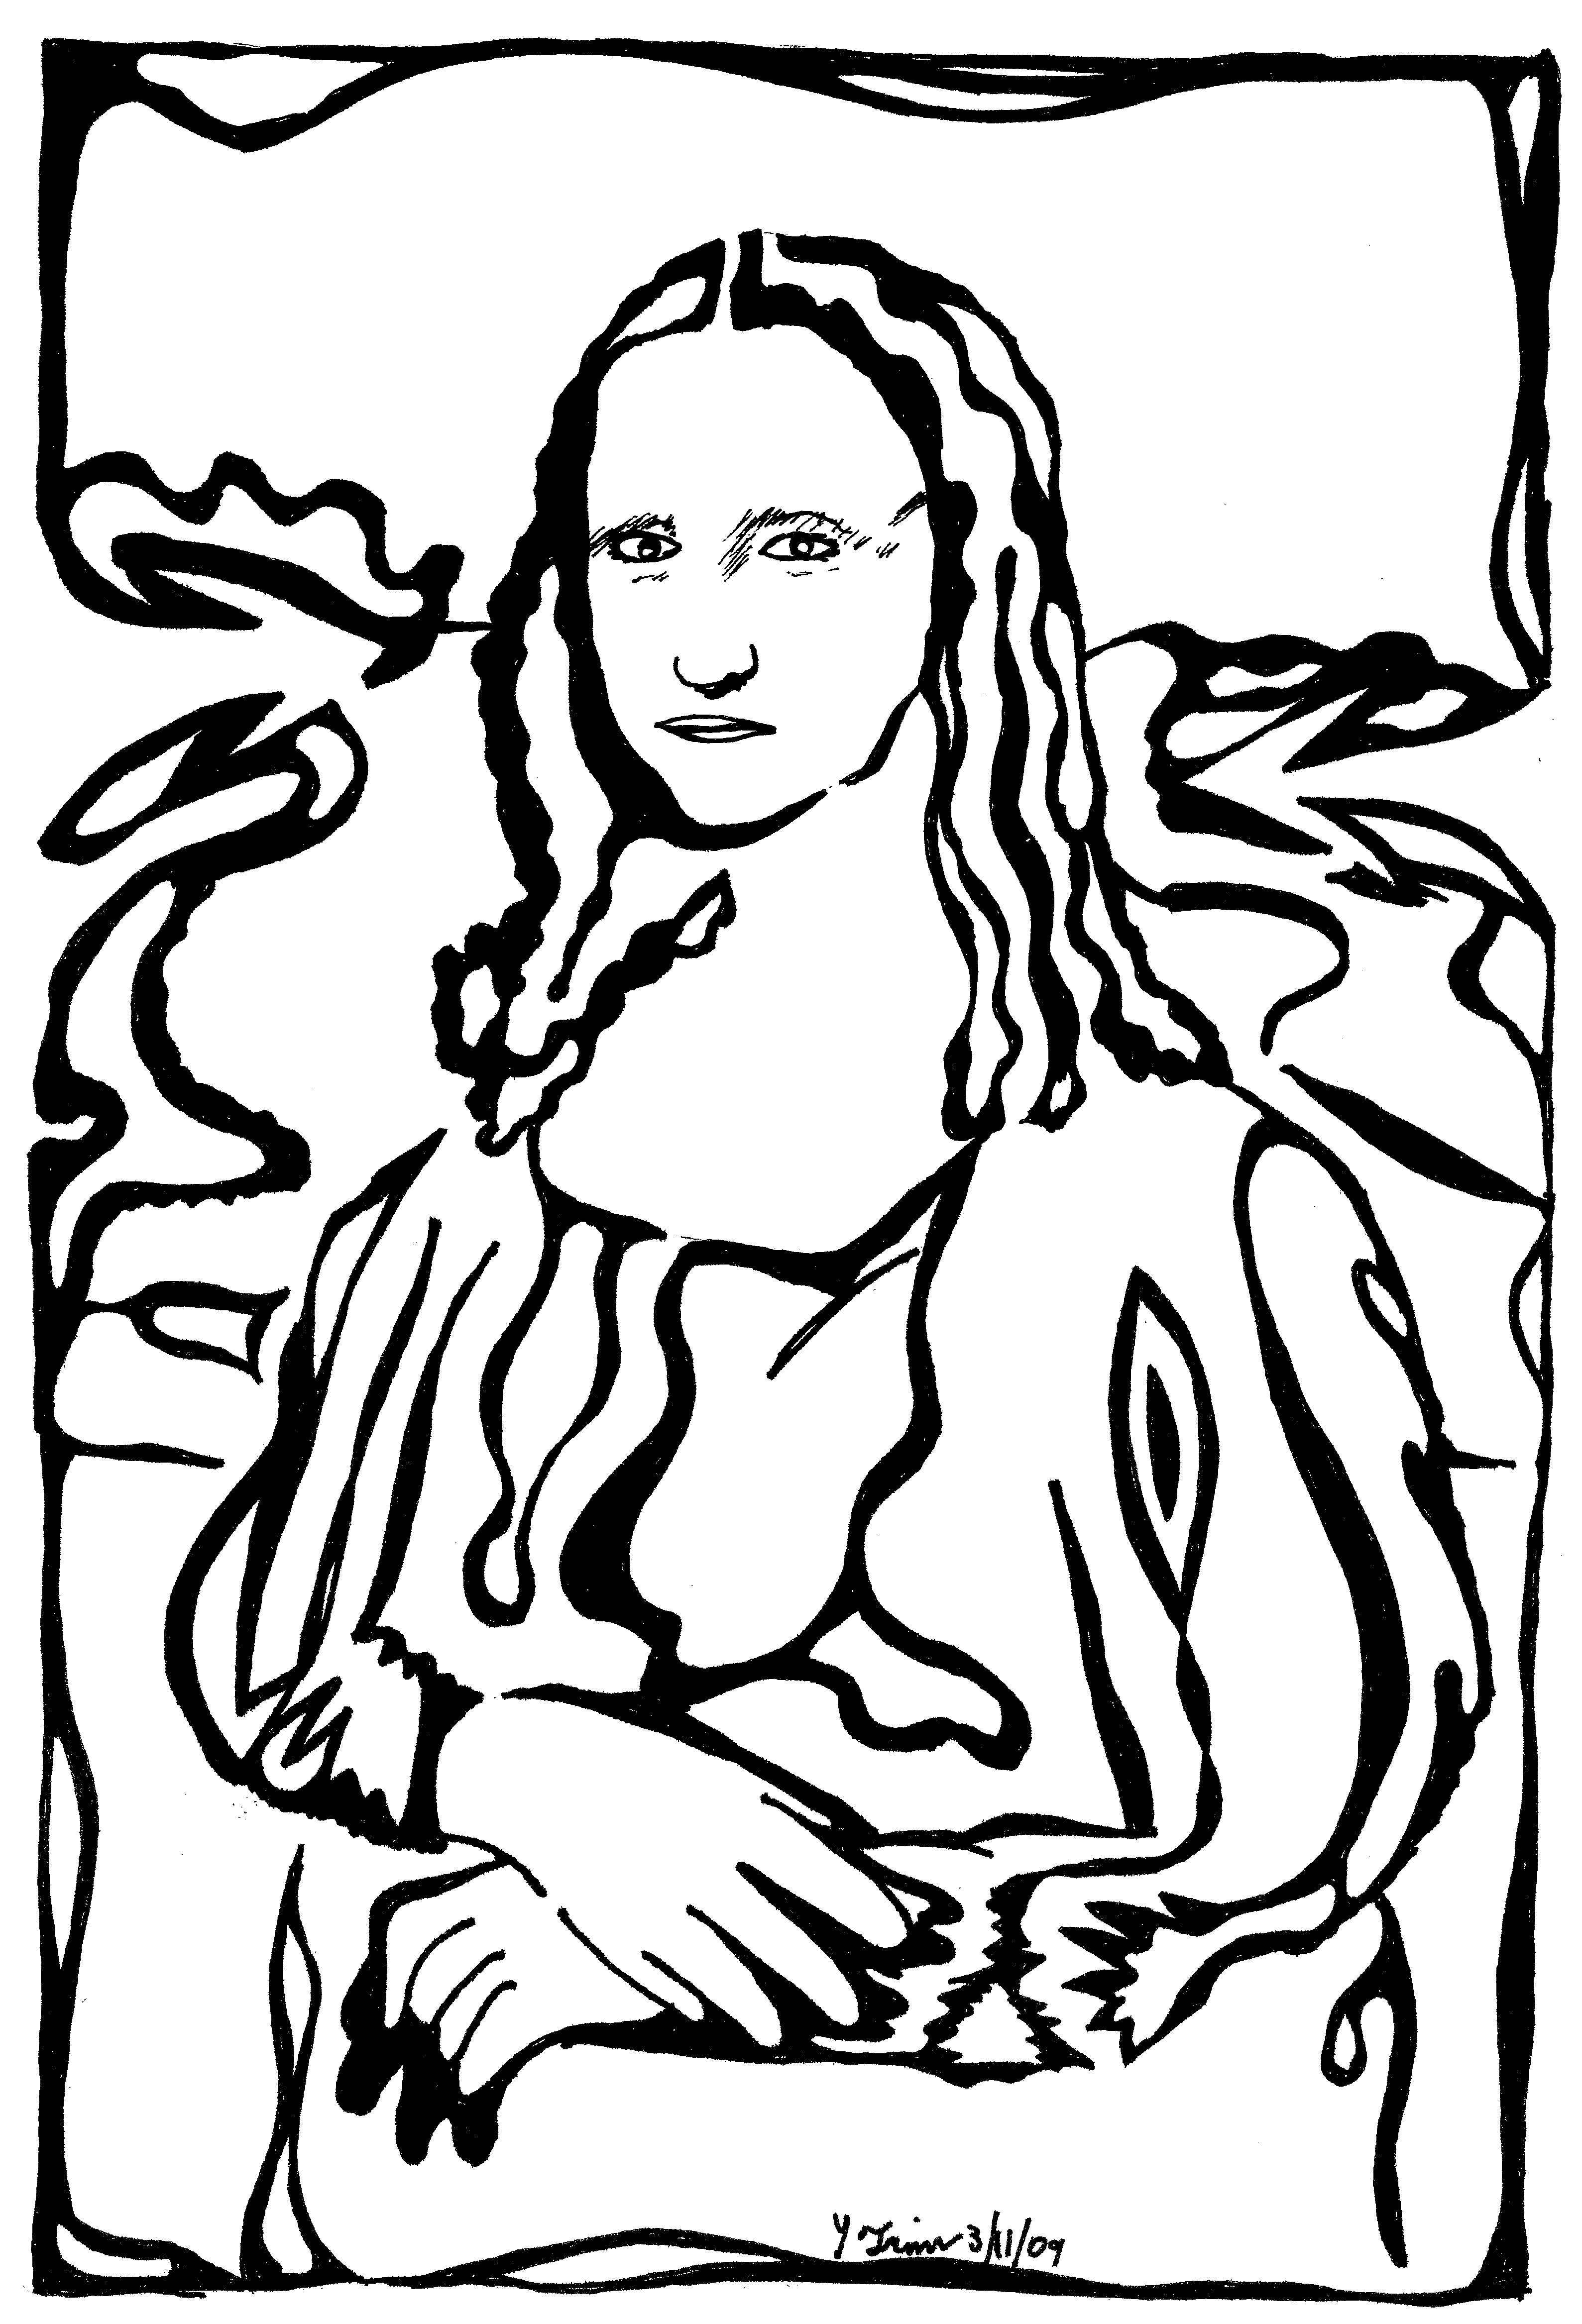 BLACK AND WHITE DRAWING MONA LISA CLIPART - ClipArt Best